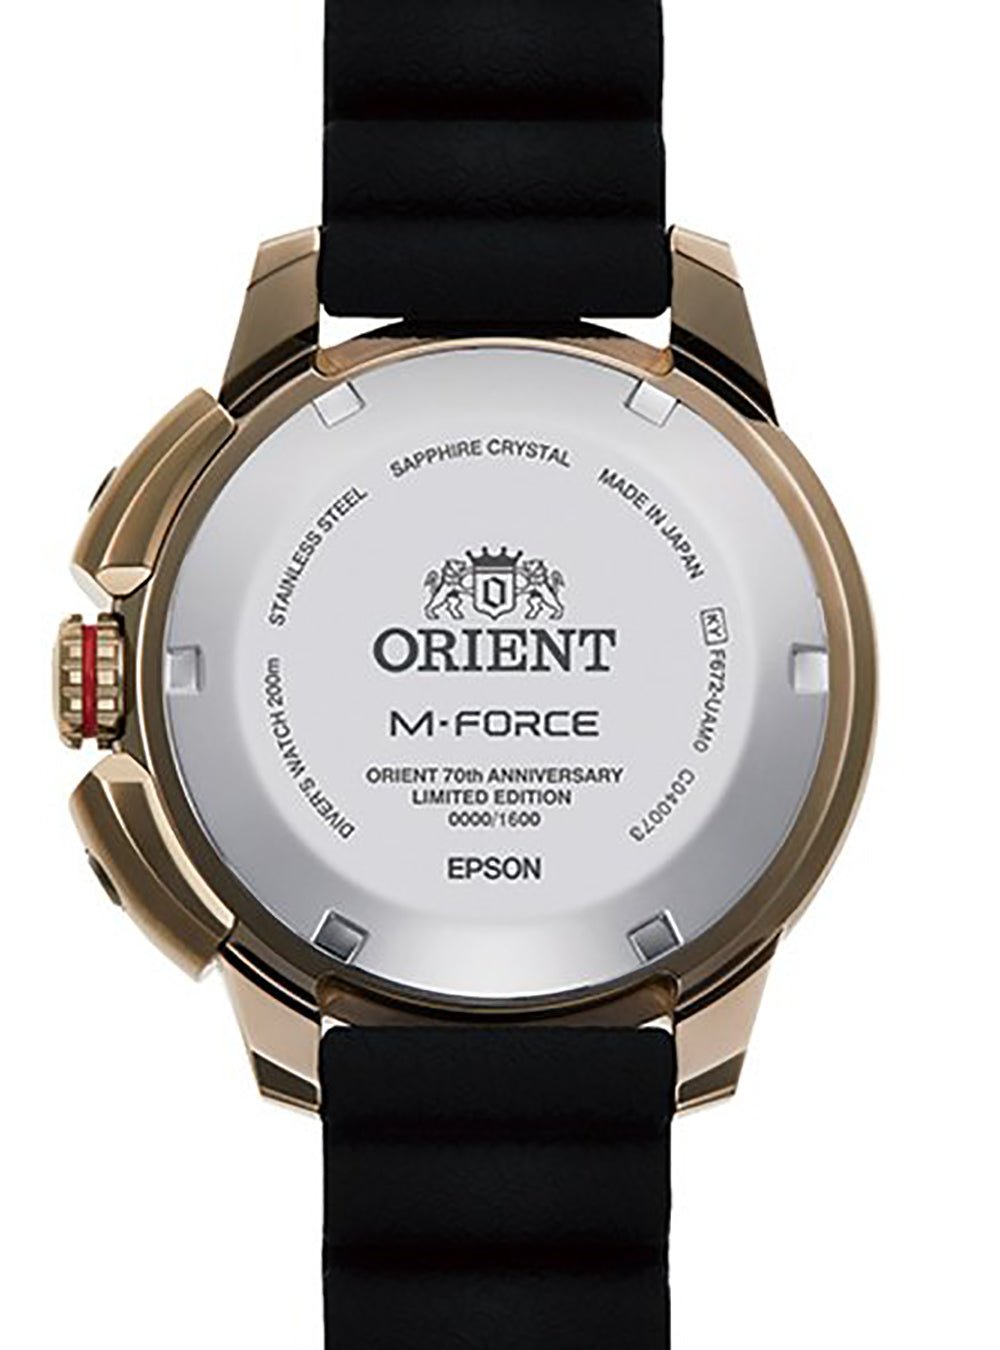 ORIENT M-FORCE SPORTS 70TH ANNIVERSARY RN-AC0L05G LIMITED EDITION MADE IN JAPAN JDMWRISTWATCHjapan-select